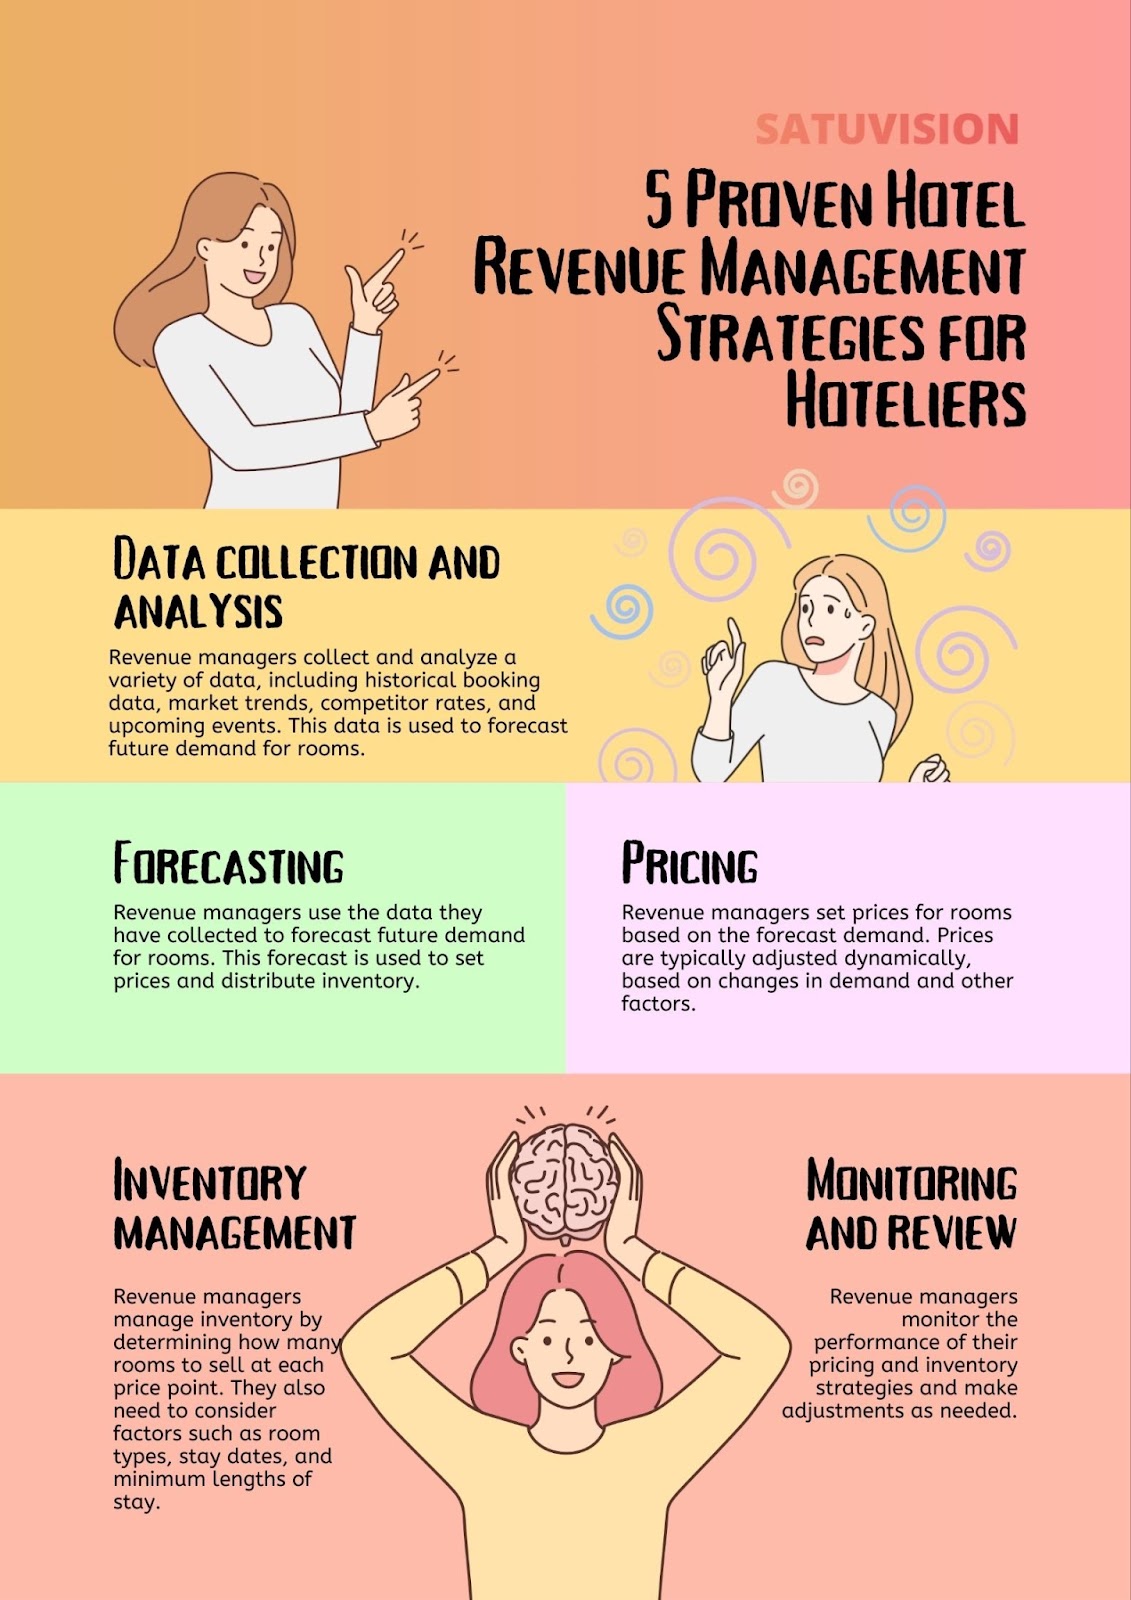 An infographic showing the 5 best strategies in hotel revenue management.